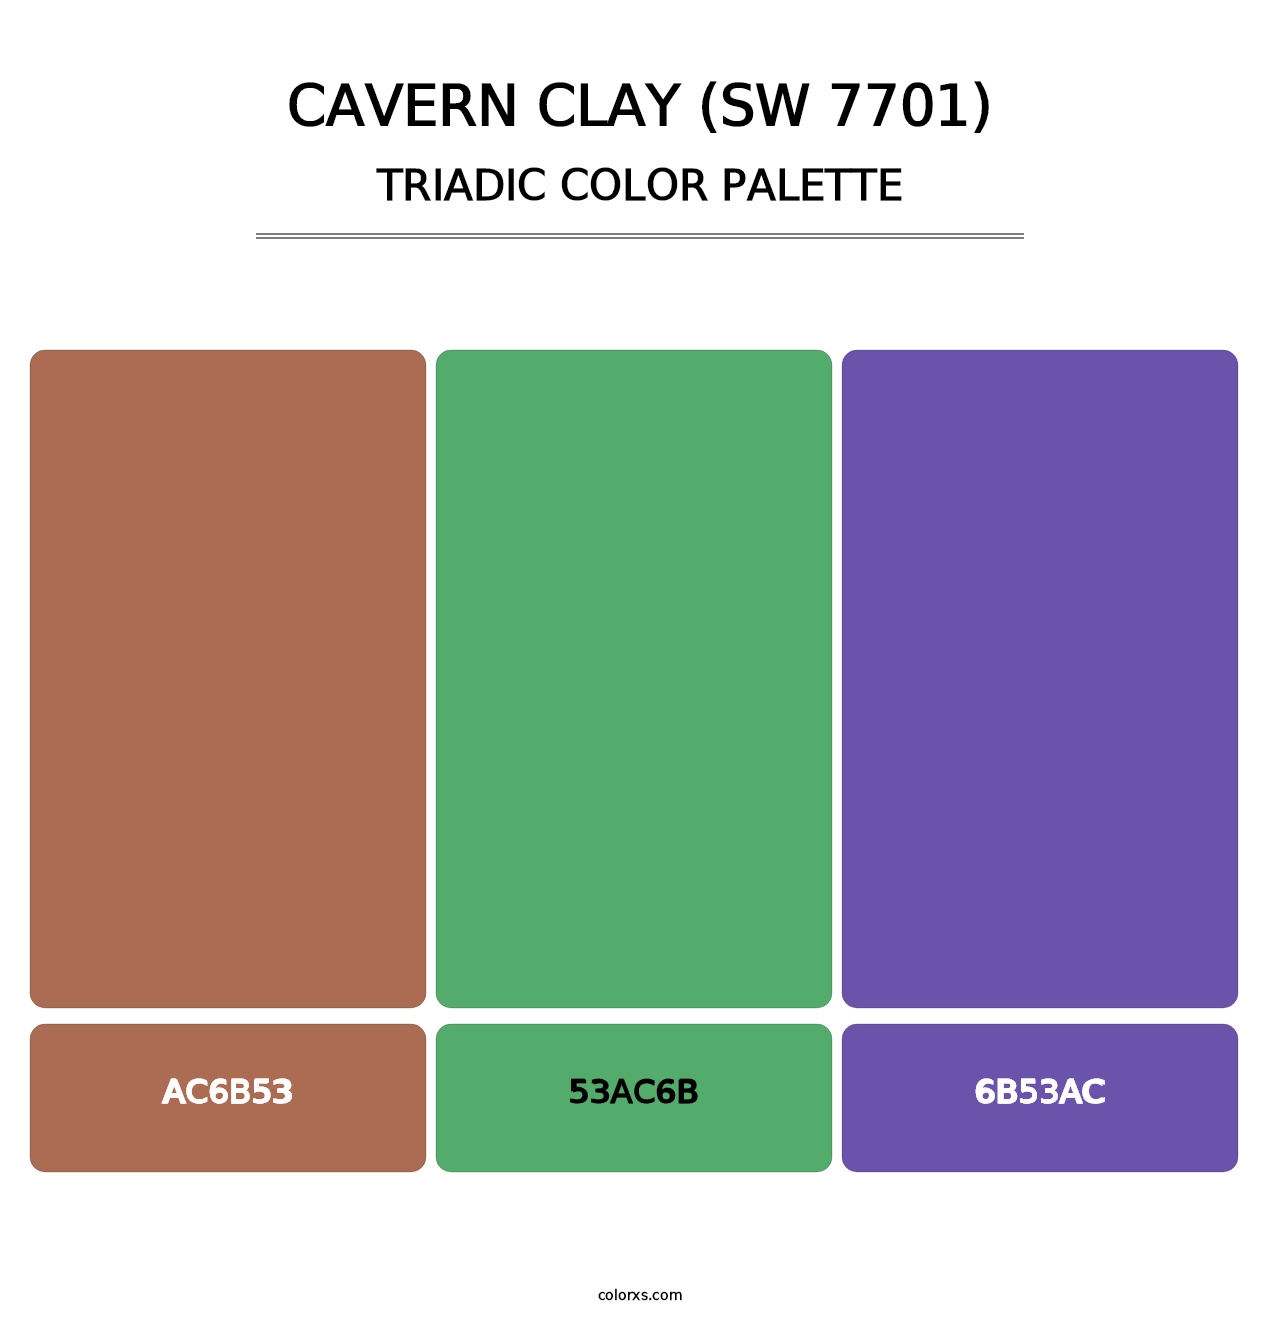 Cavern Clay (SW 7701) - Triadic Color Palette